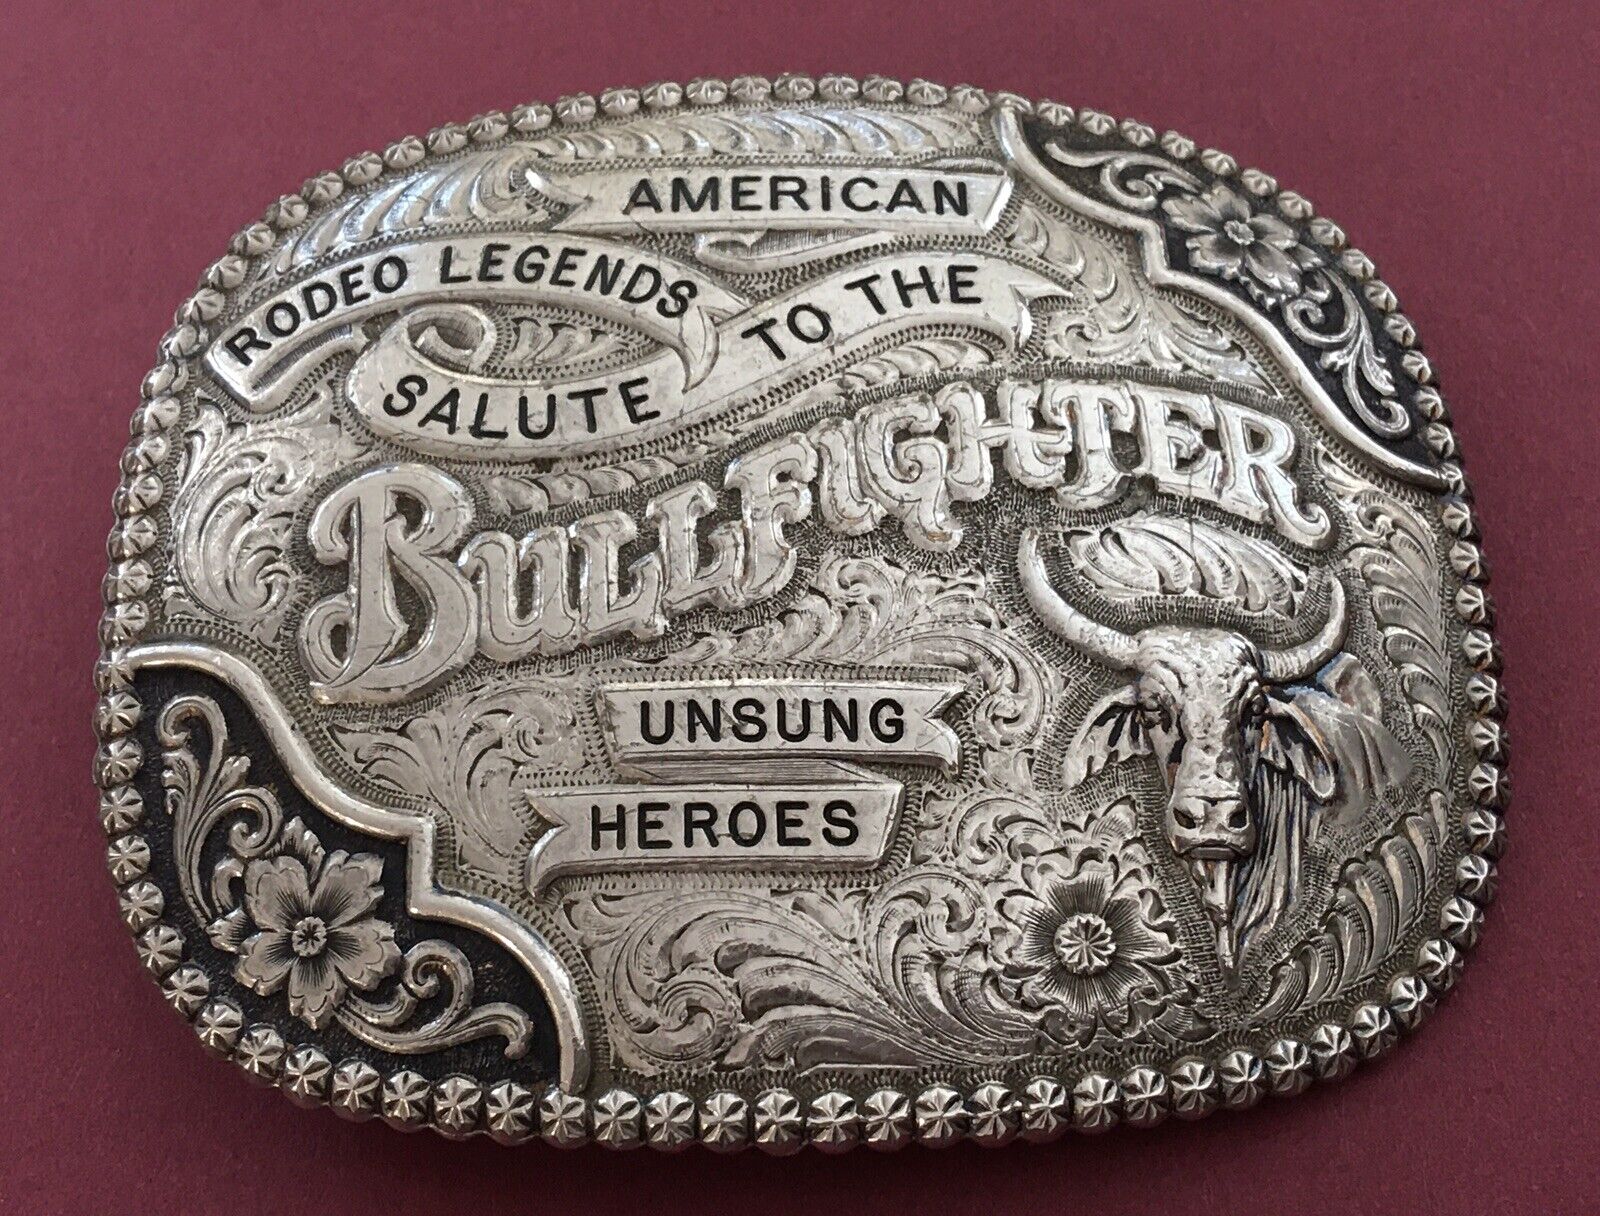 Awesome Gist Bronze American Rodeo Legends Bullfighter Salute Trophy Belt Buckle